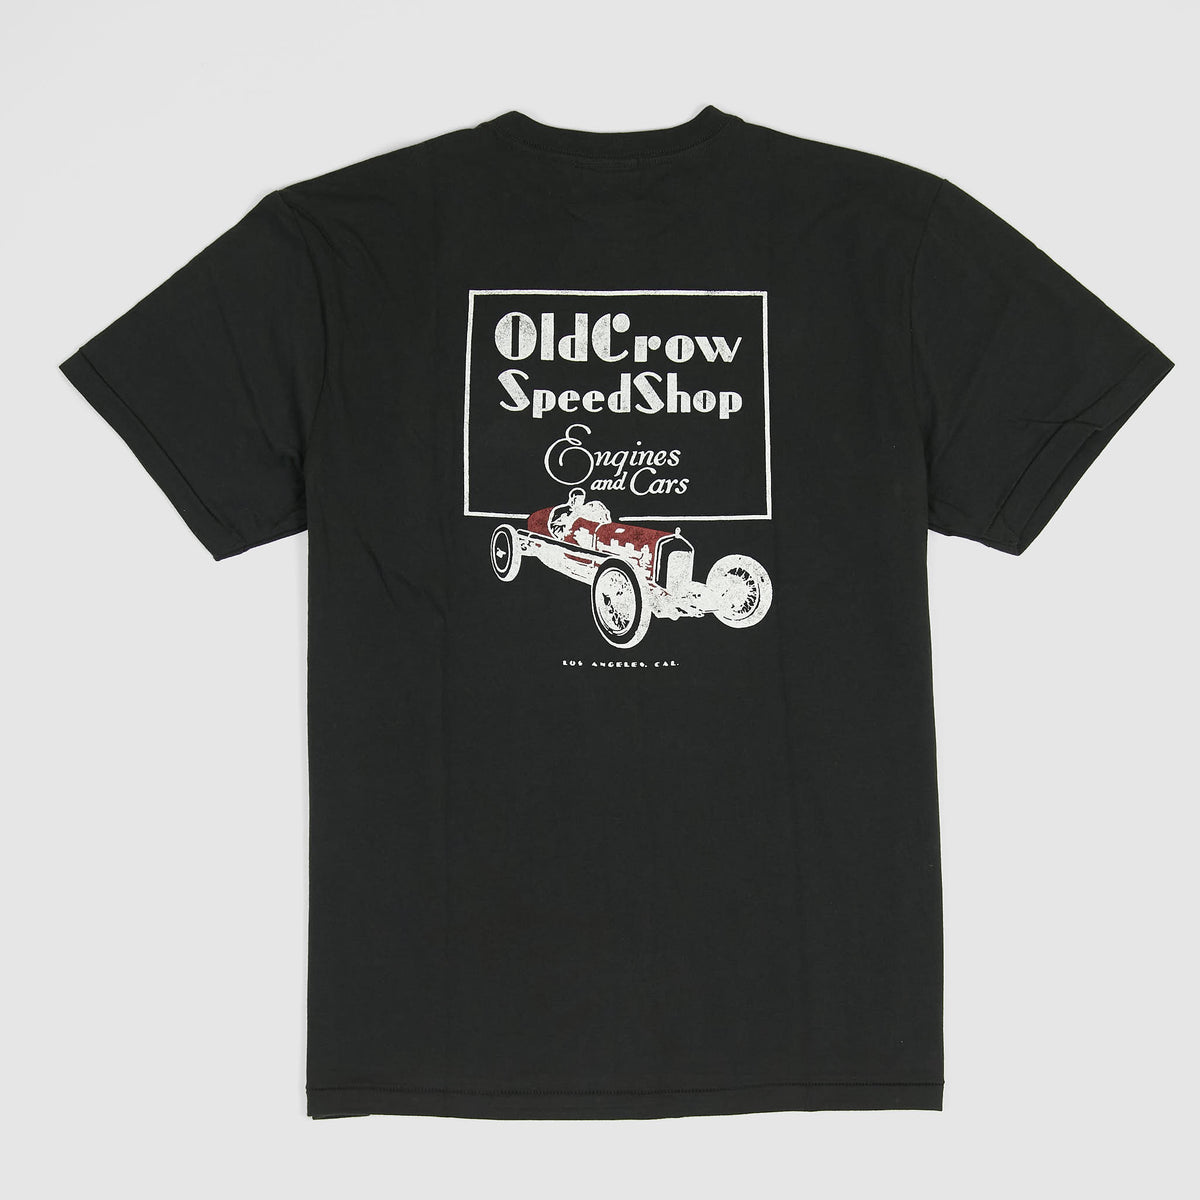 Old Crow Speed Shop by Glad Hand &amp; Co. Pocket Short Sleeve Crew Neck T-Shirt